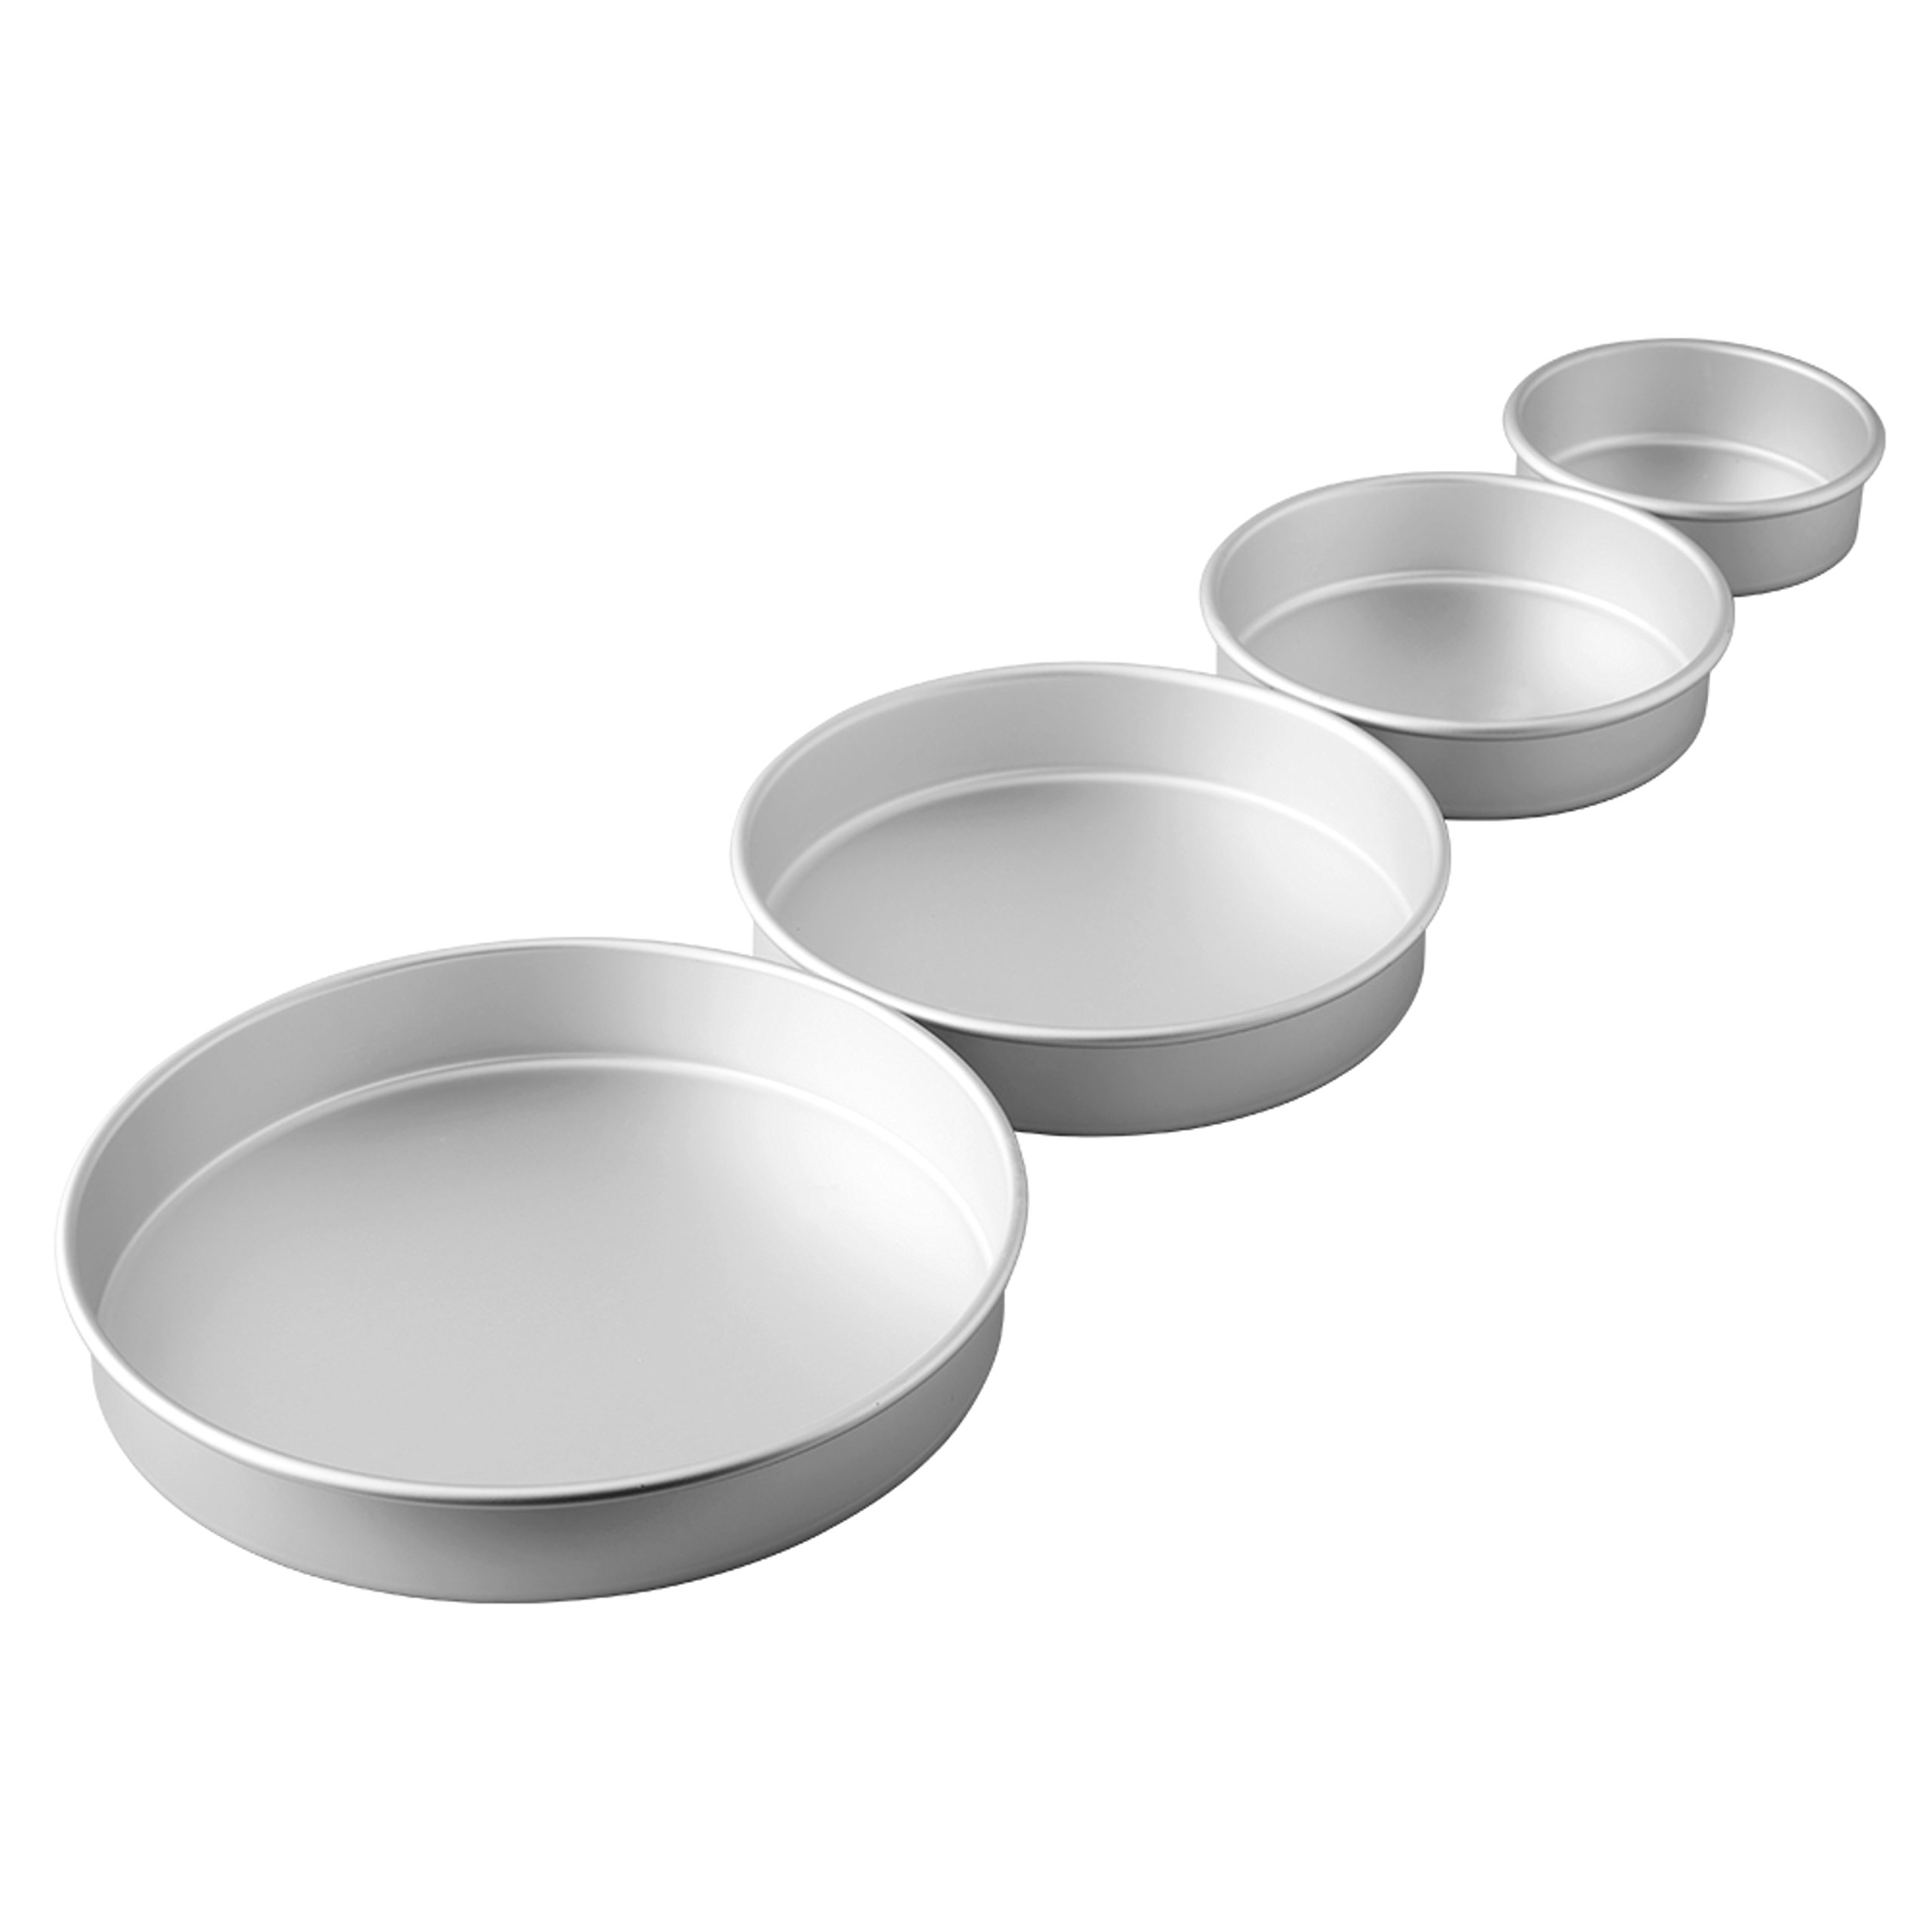 Wilton Bake-Even Strips and Round Cake Pan Set, 8-Piece - 6, 8, 10, and 12 x 2-Inch Aluminum Cake Pans